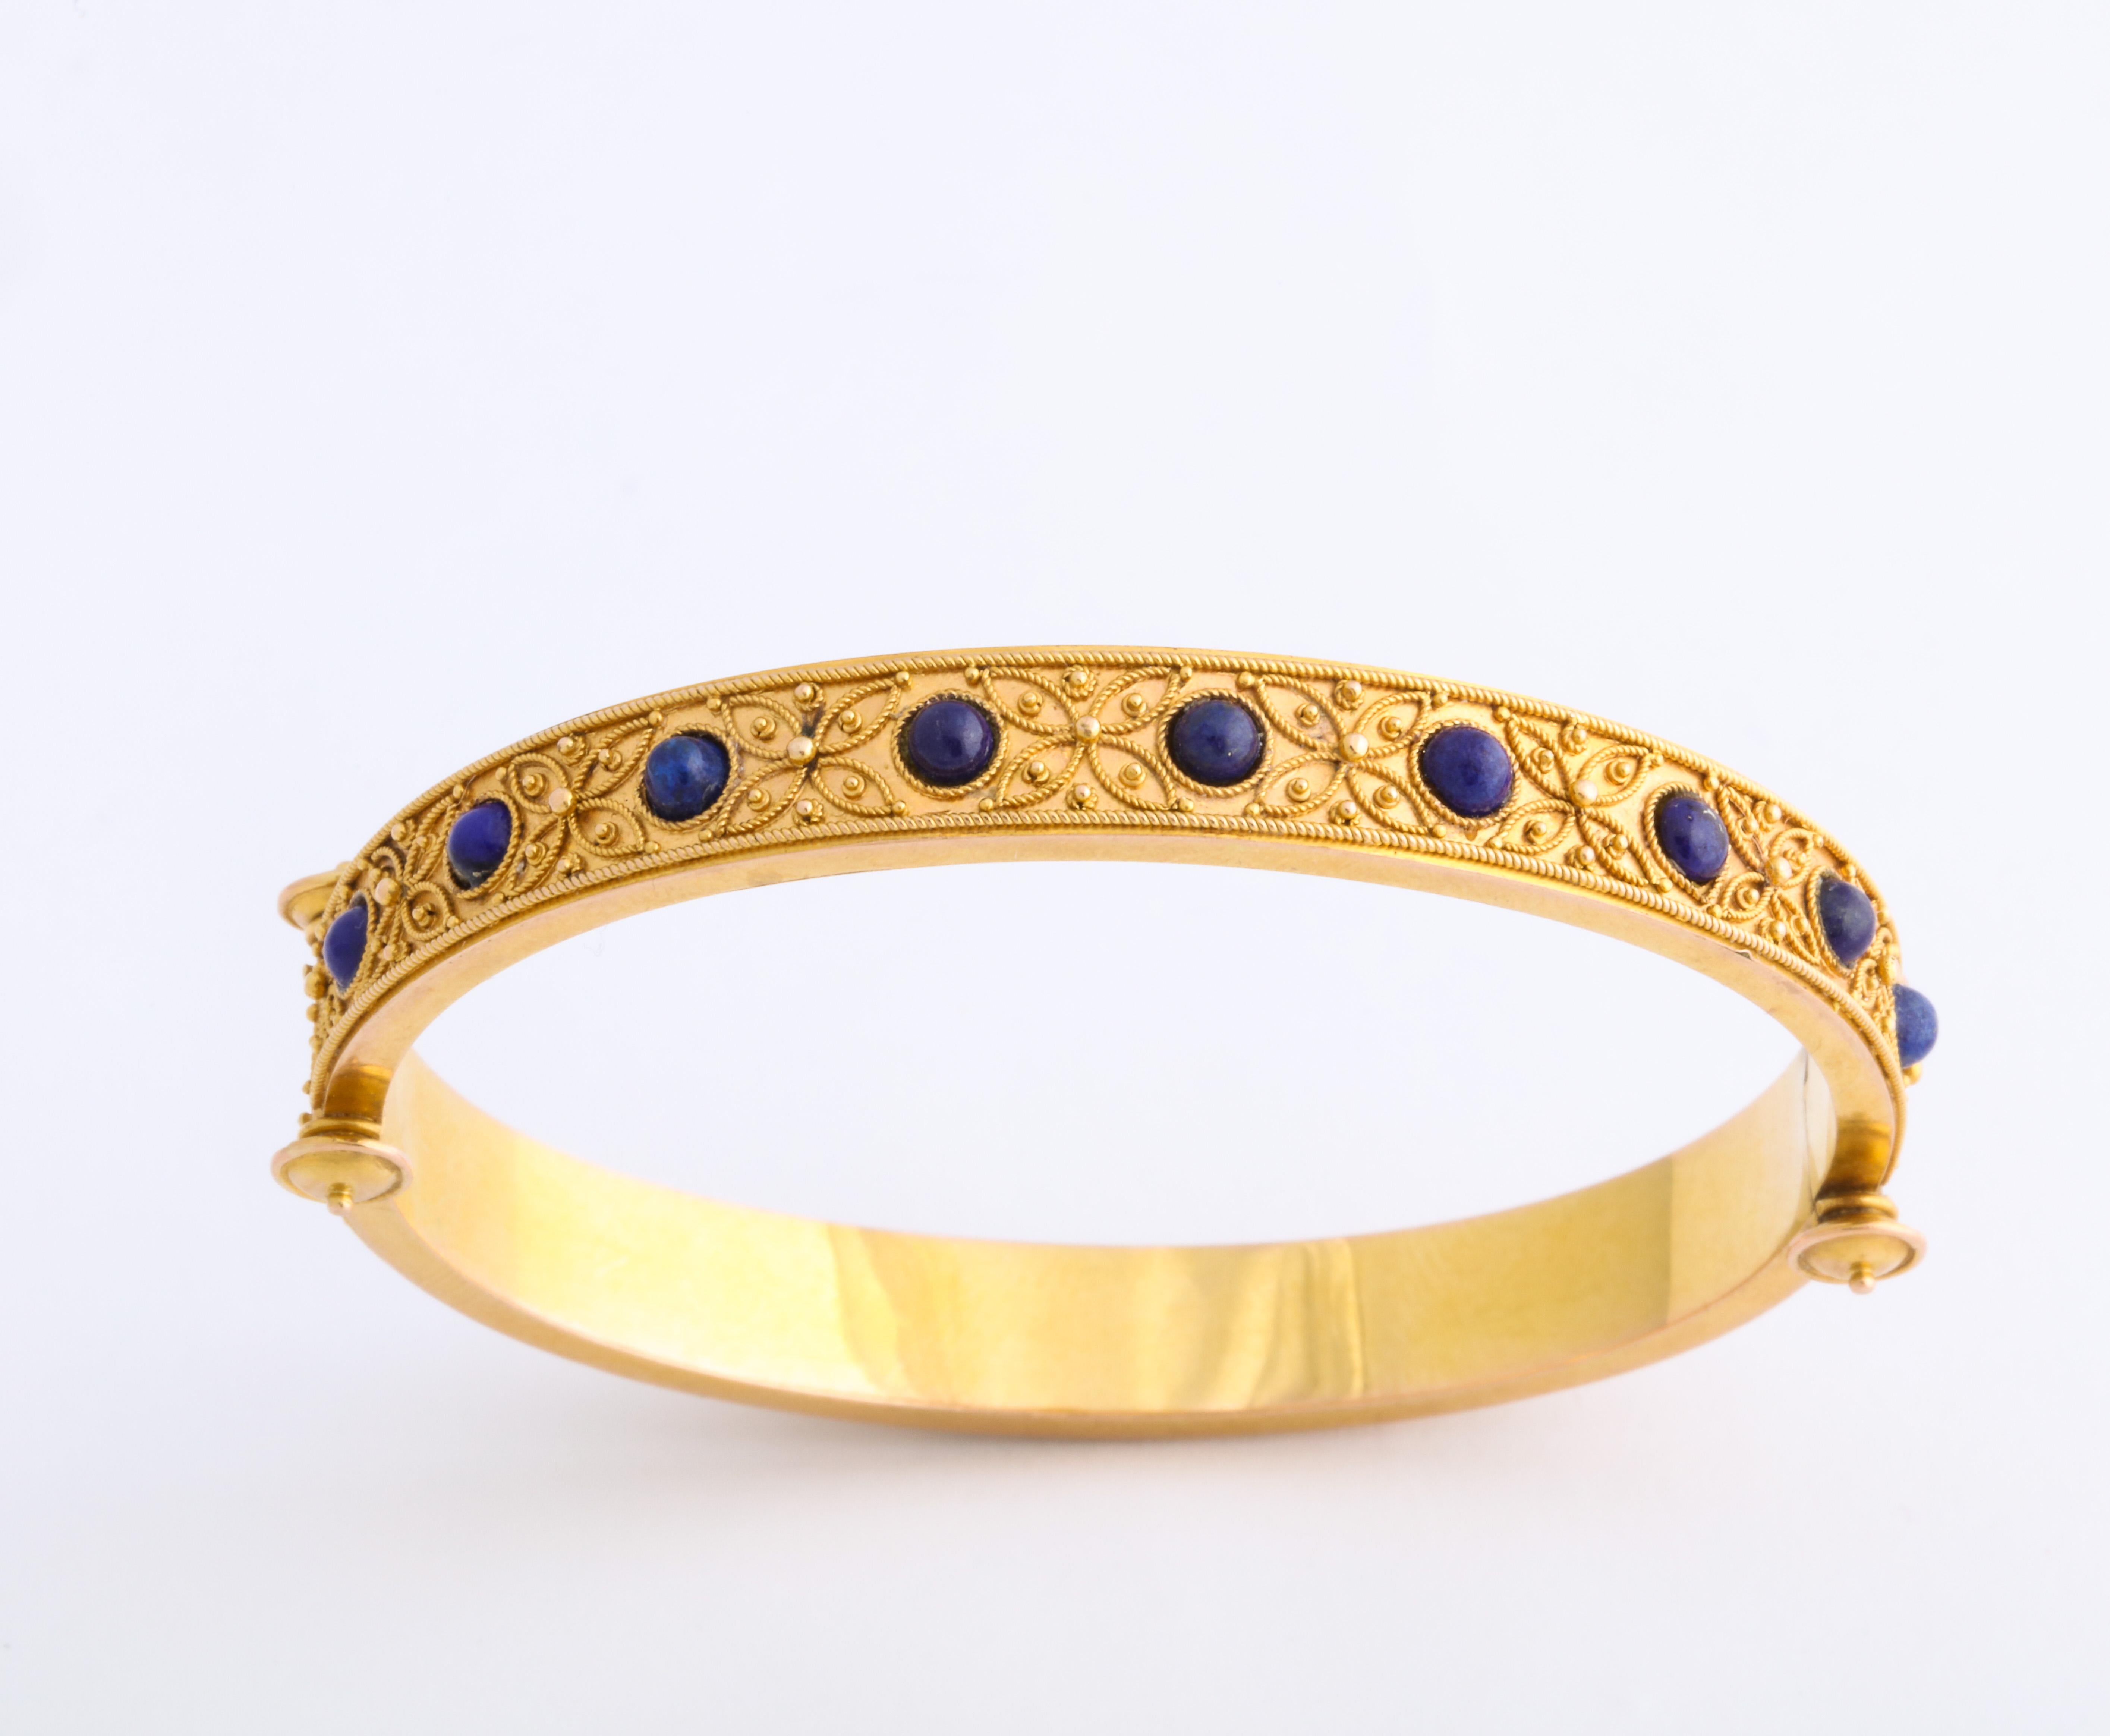 Top of the line in quality, the 18 Kt Etruscan Revival bracelet is set with cabochon lapis lazuli stone from east to west on its face interspersed with very fine wirework forming pointed petal flowers and highlighted with tiny granulation all